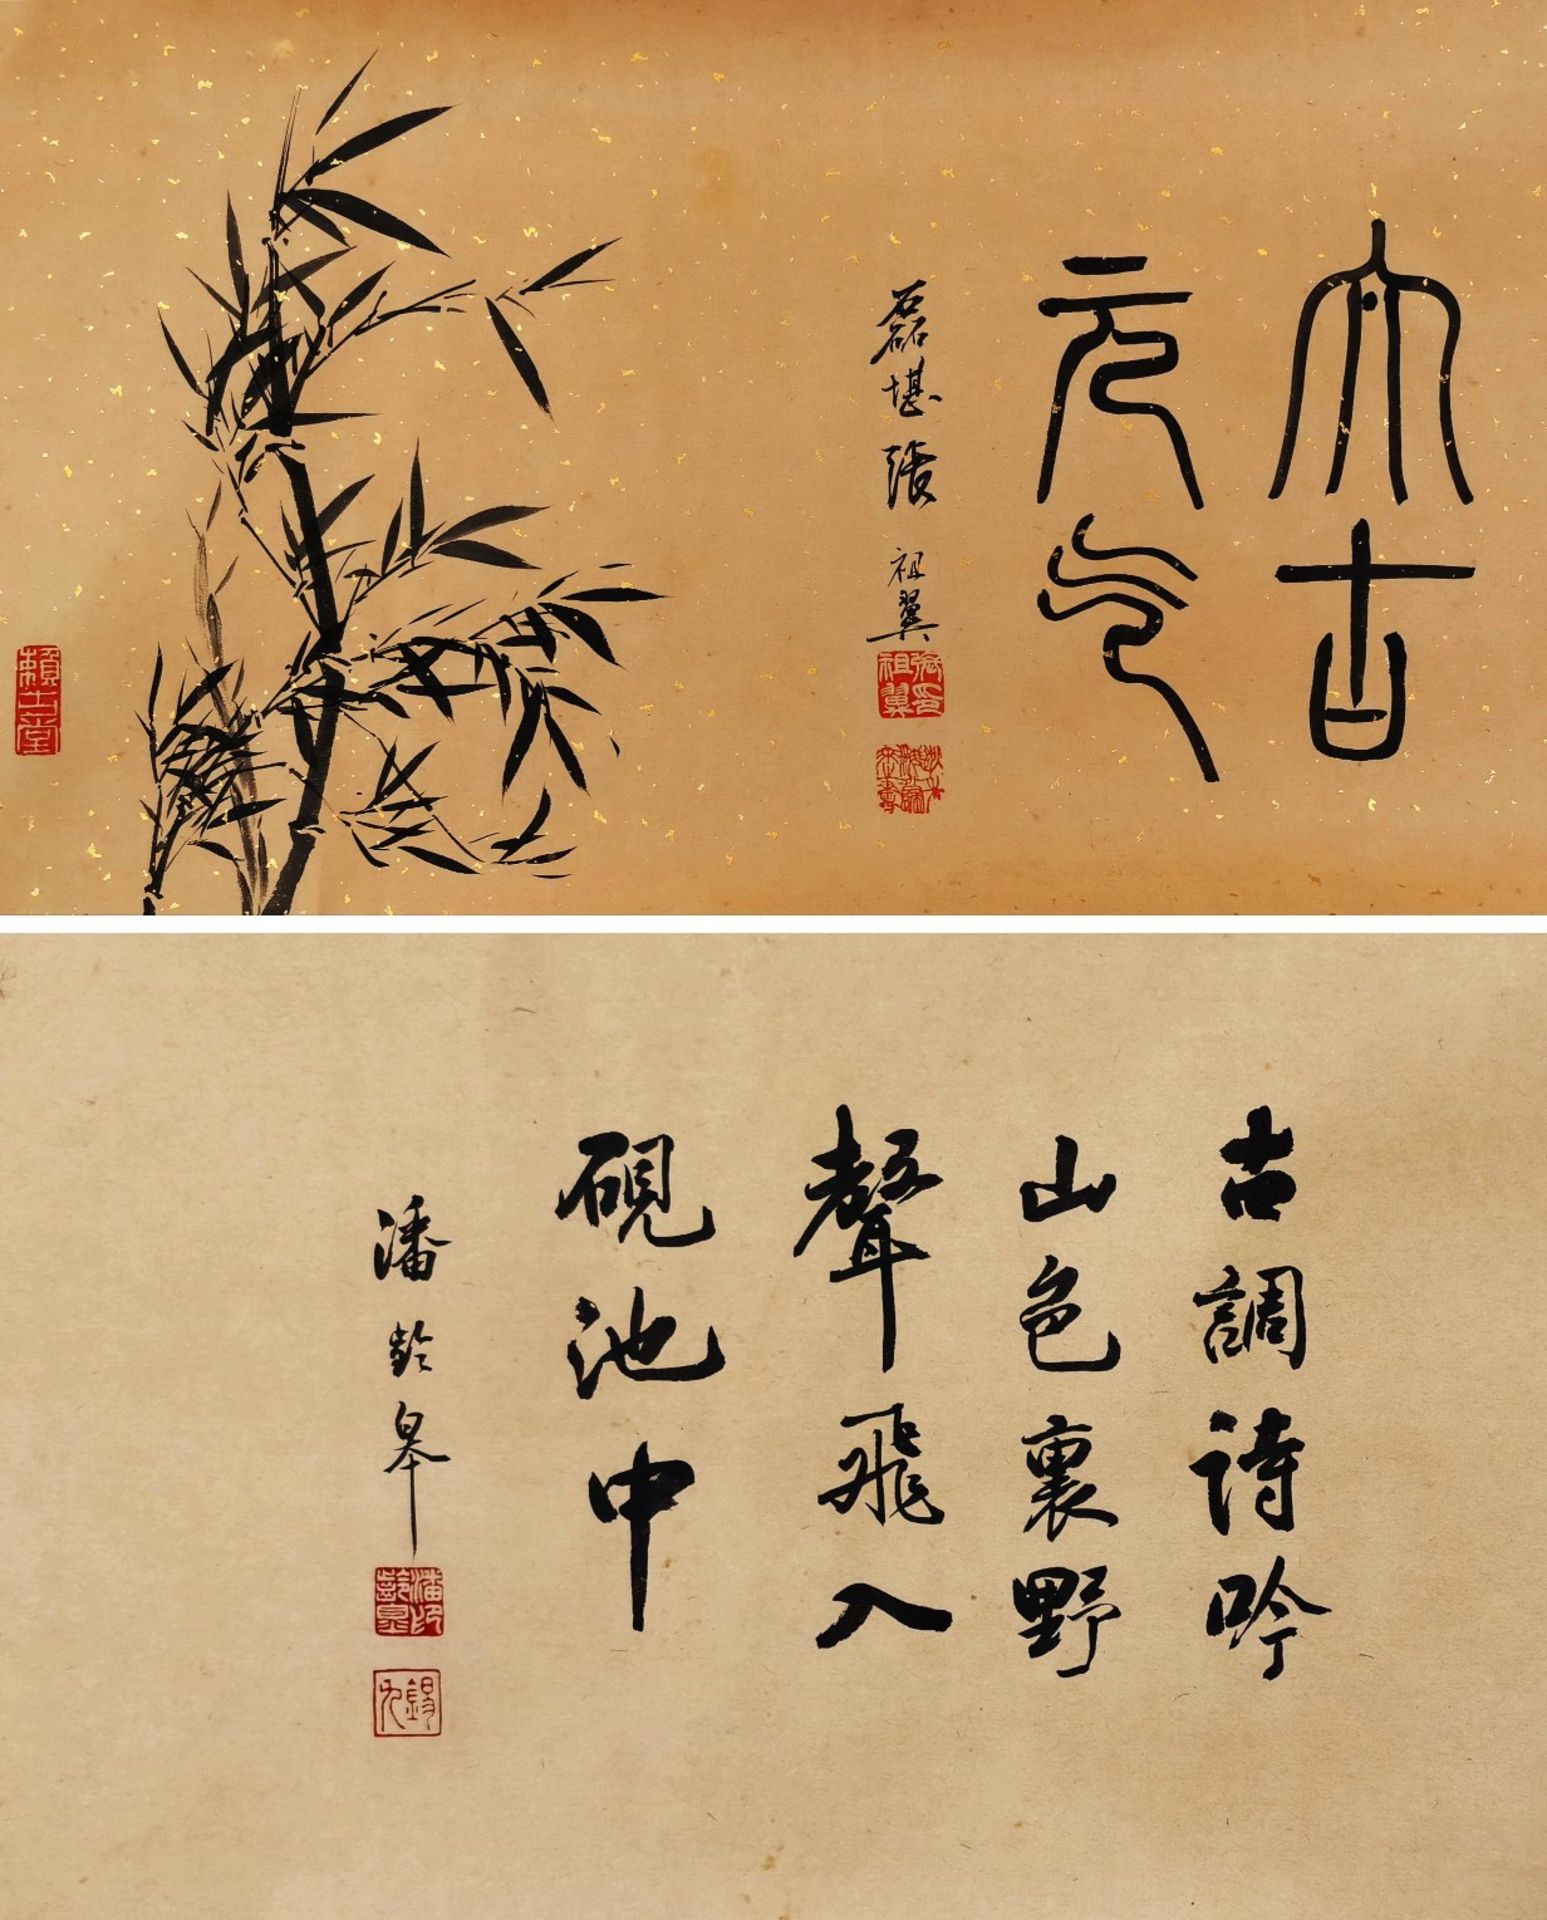 A Chinese Hand Scroll Painting By Jing Hao - Image 9 of 9